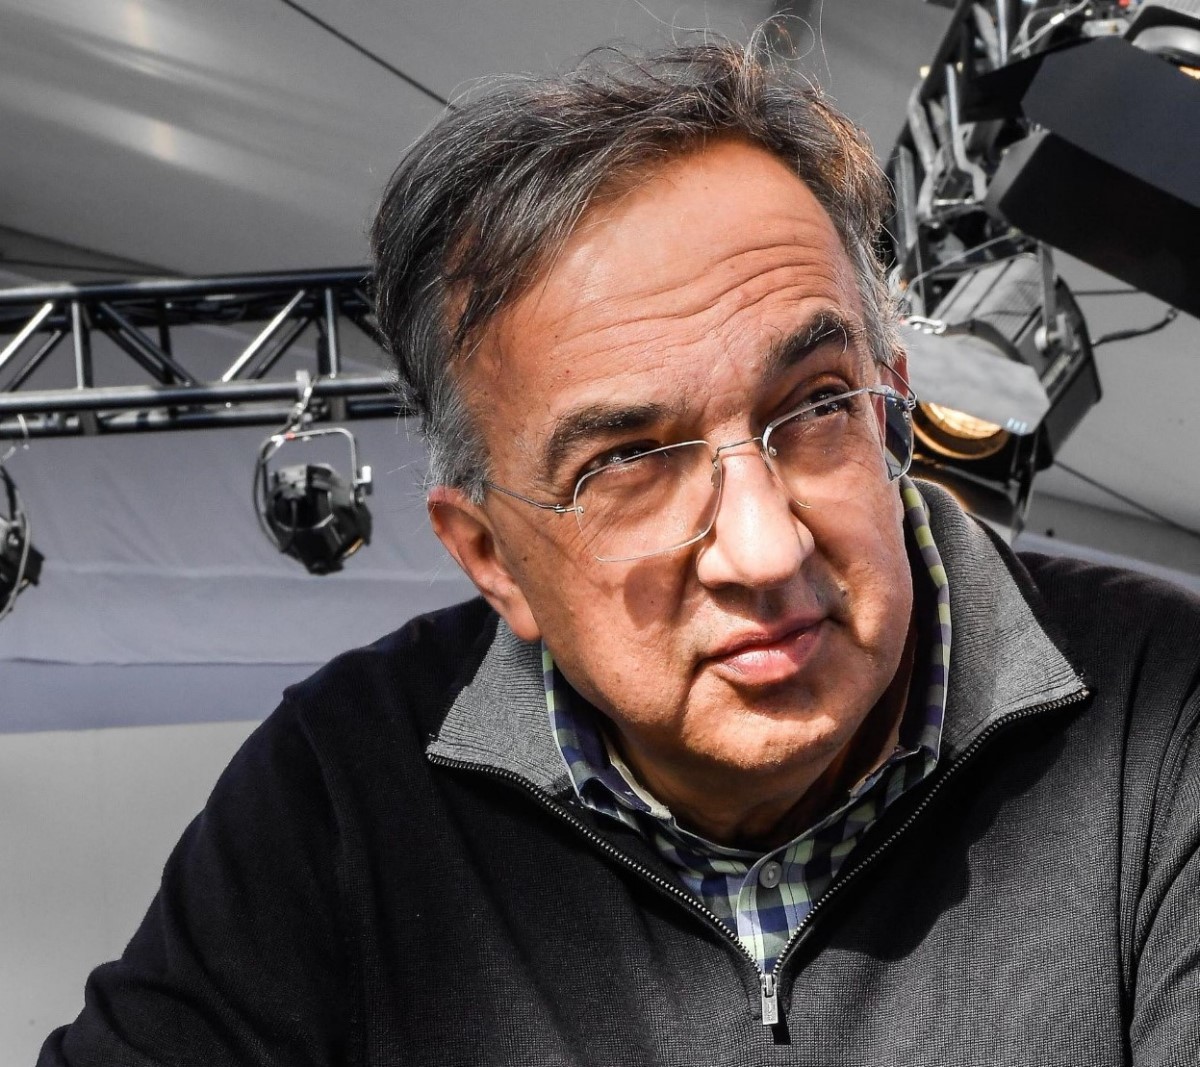 Marchionne will eat his words on his Ferarris never being electric